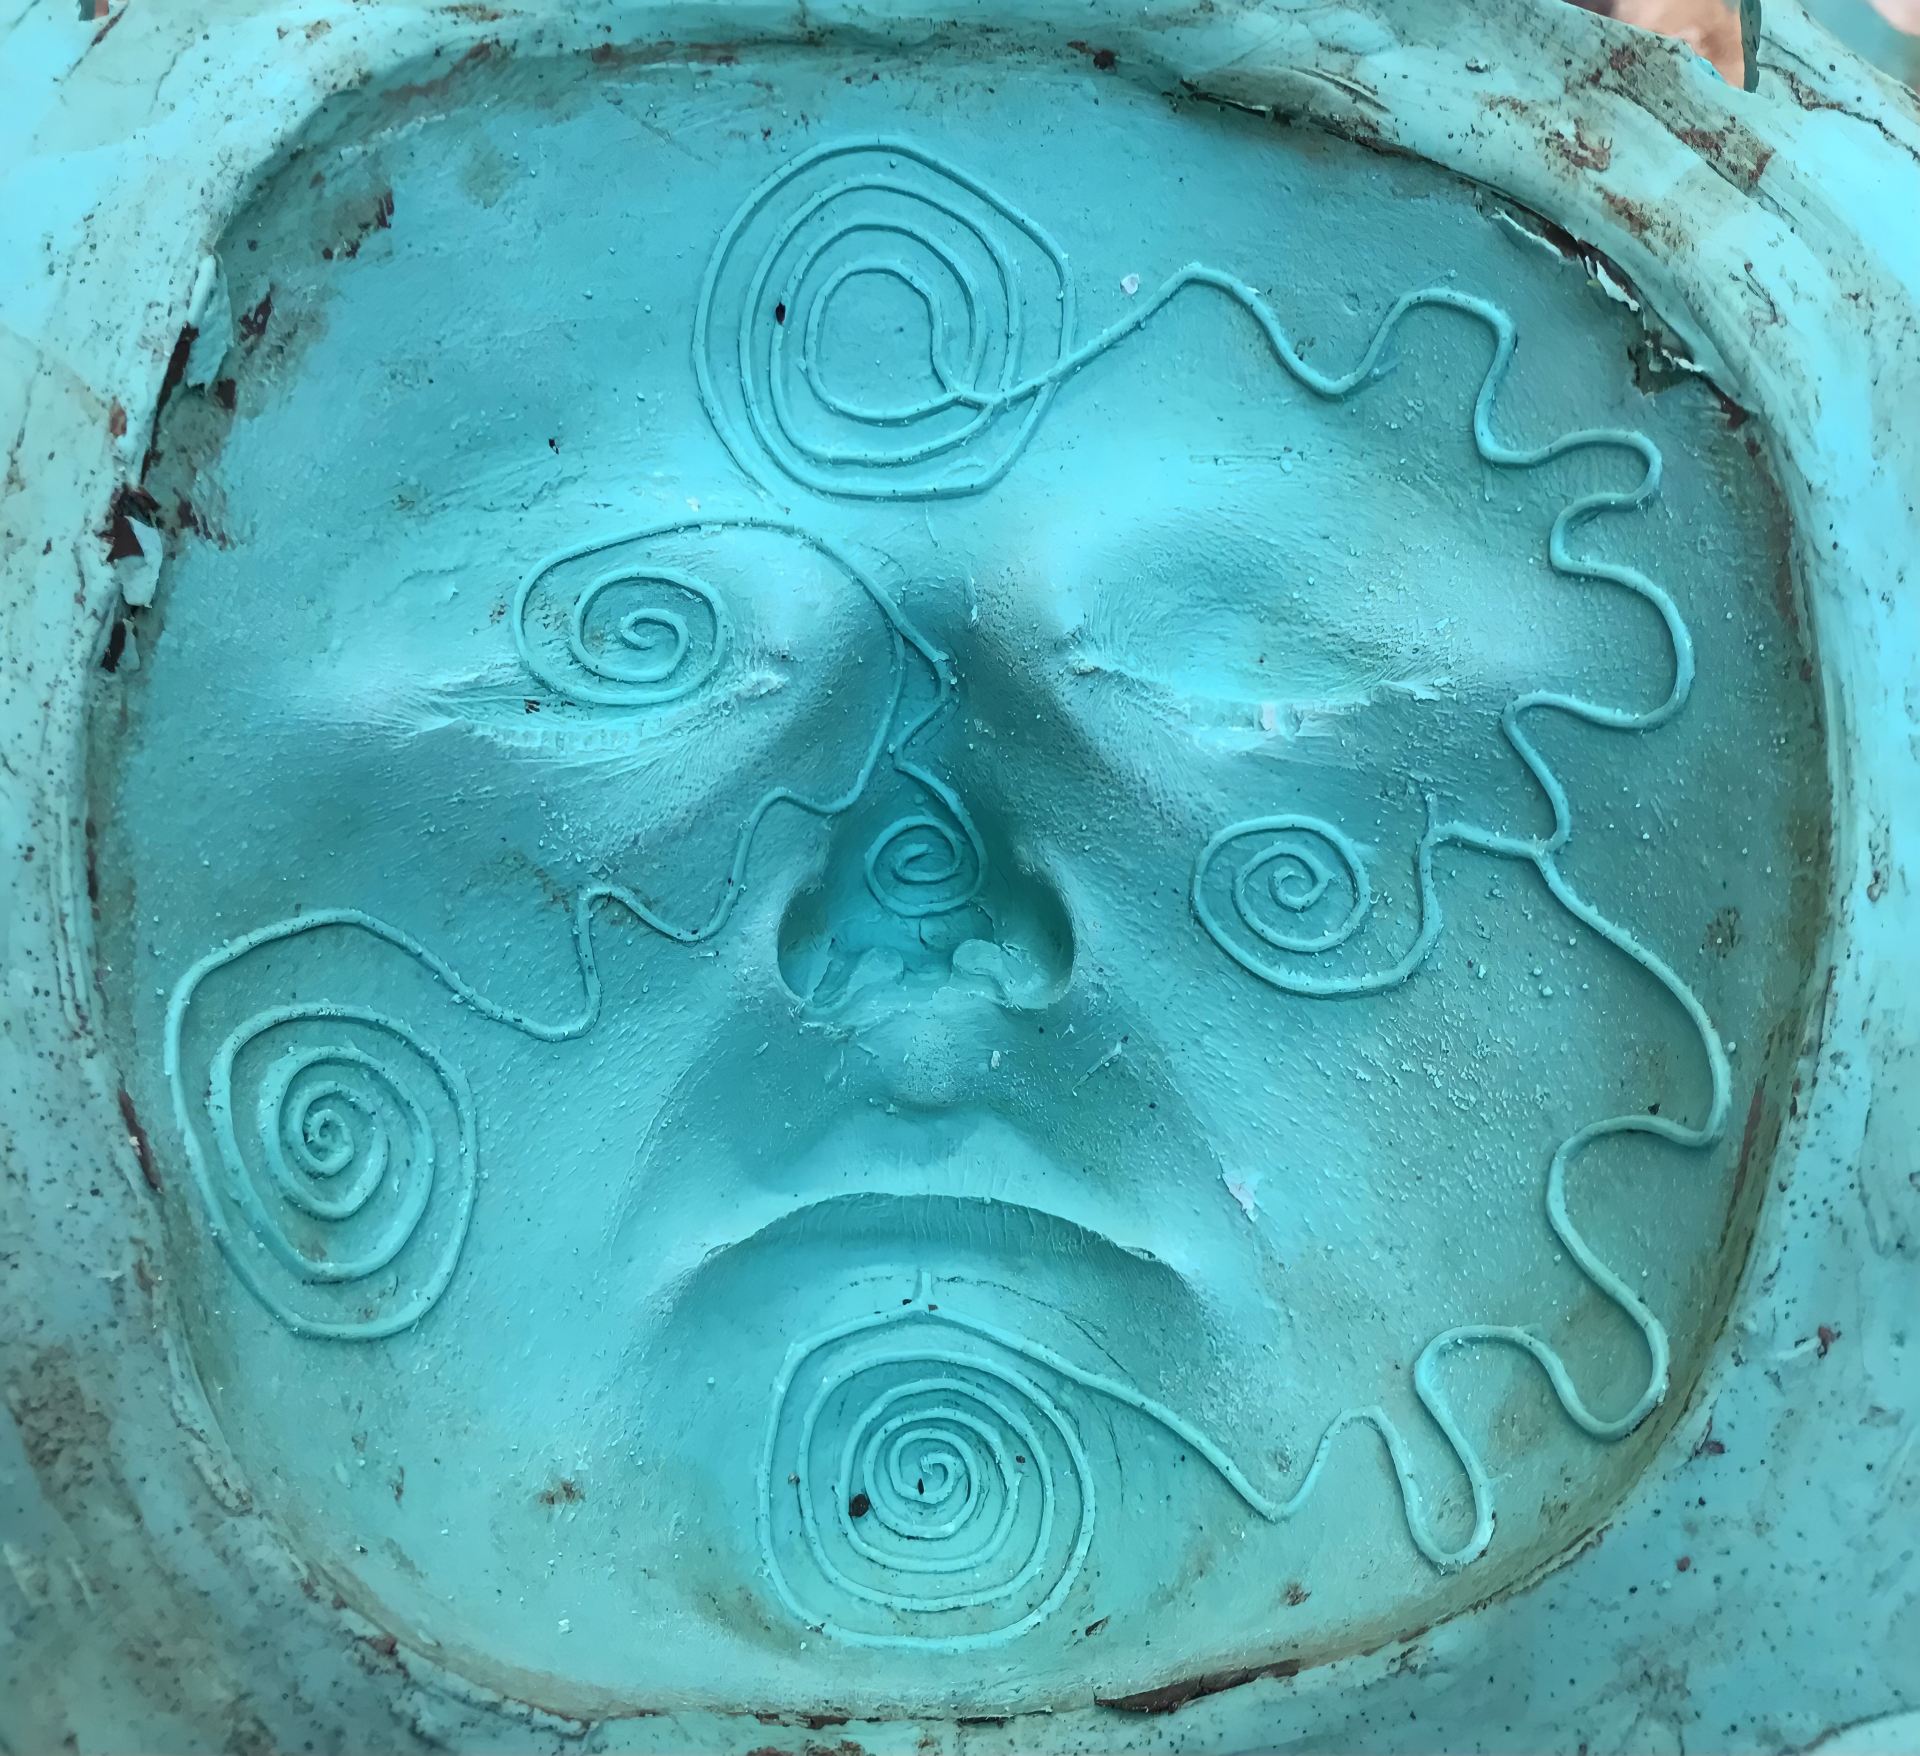 An image of a flattened, blue face covered in an indented spiral pattern.